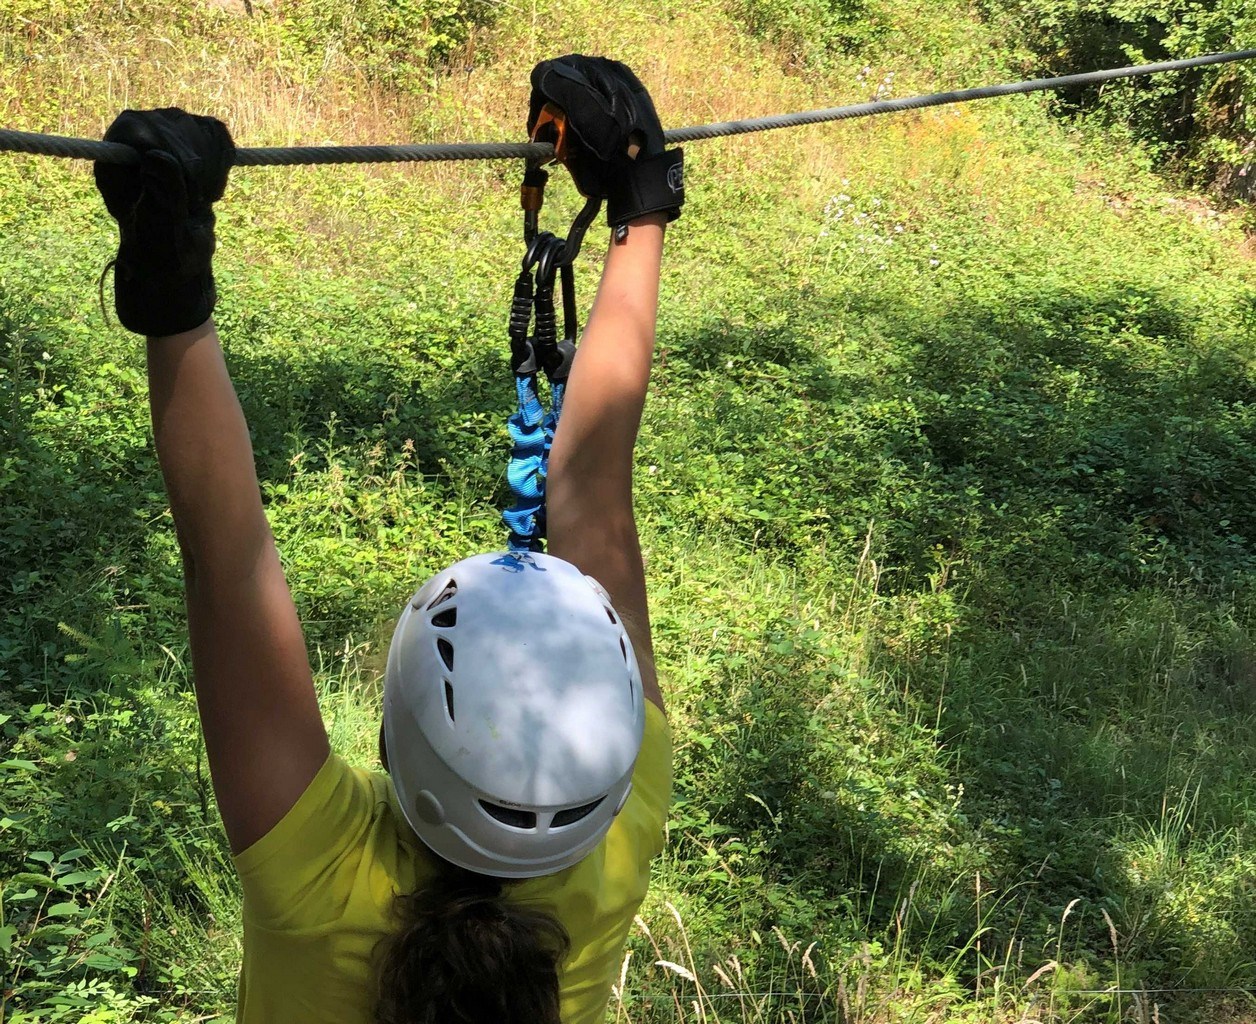 Image Via Ferrata and zip line route in the forest | TeambuildingGuide